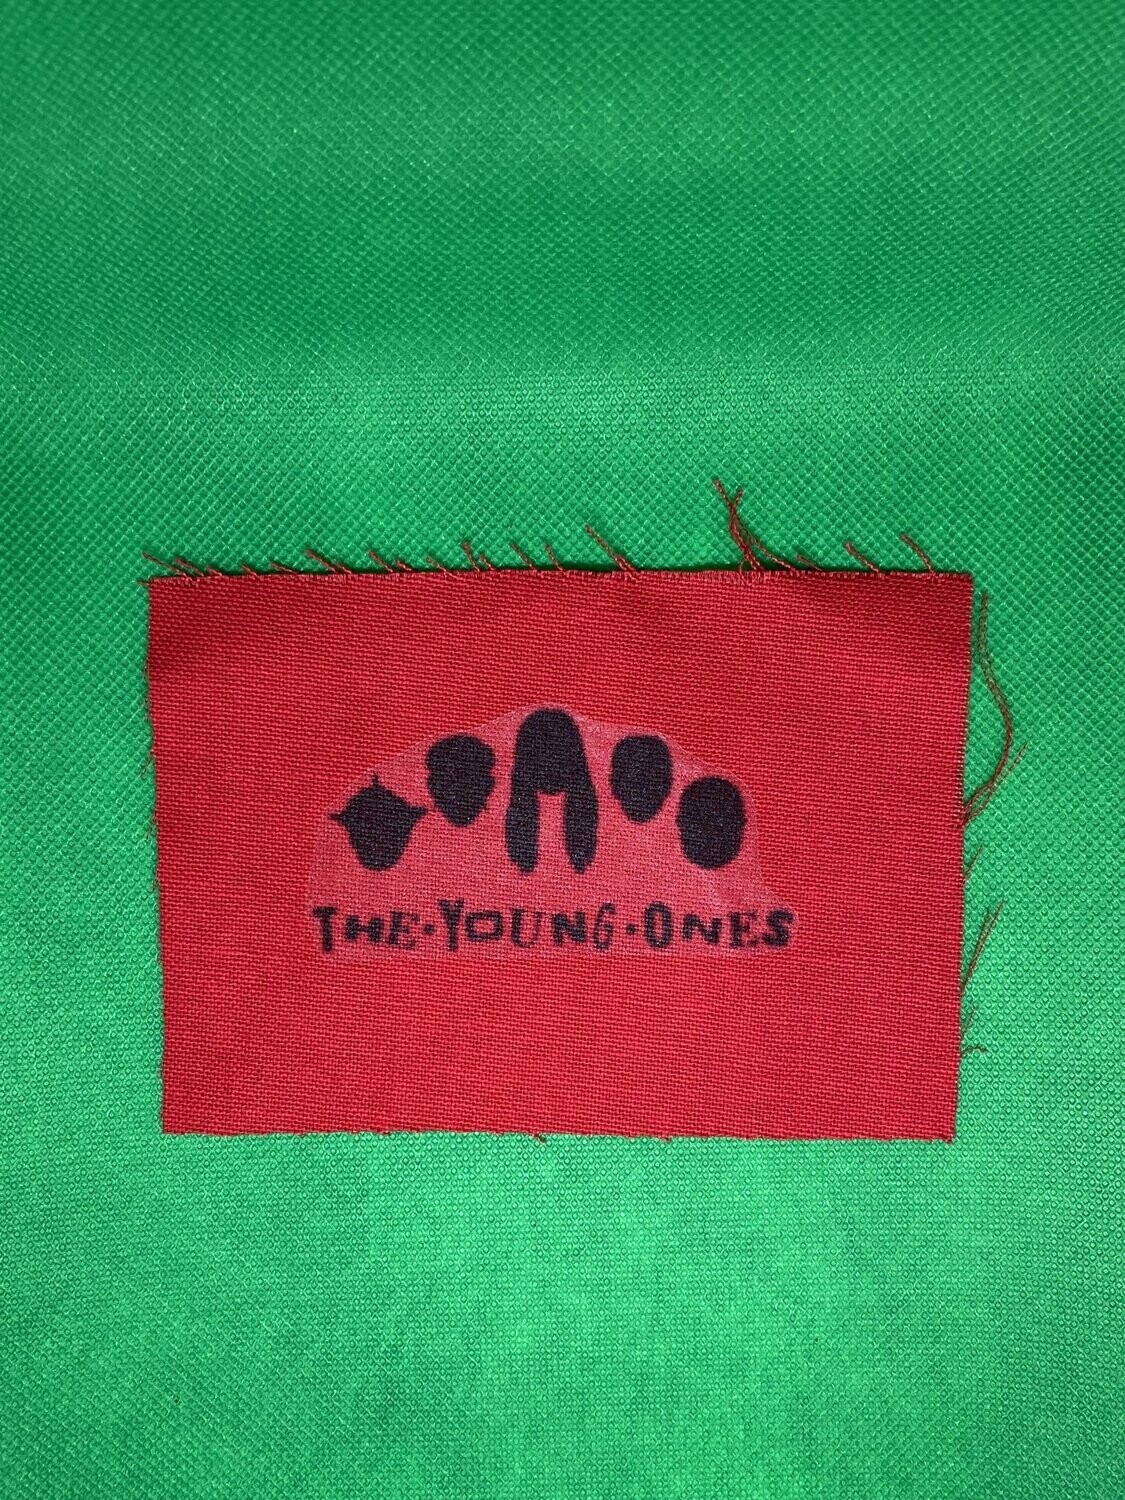 The Young Ones Patch